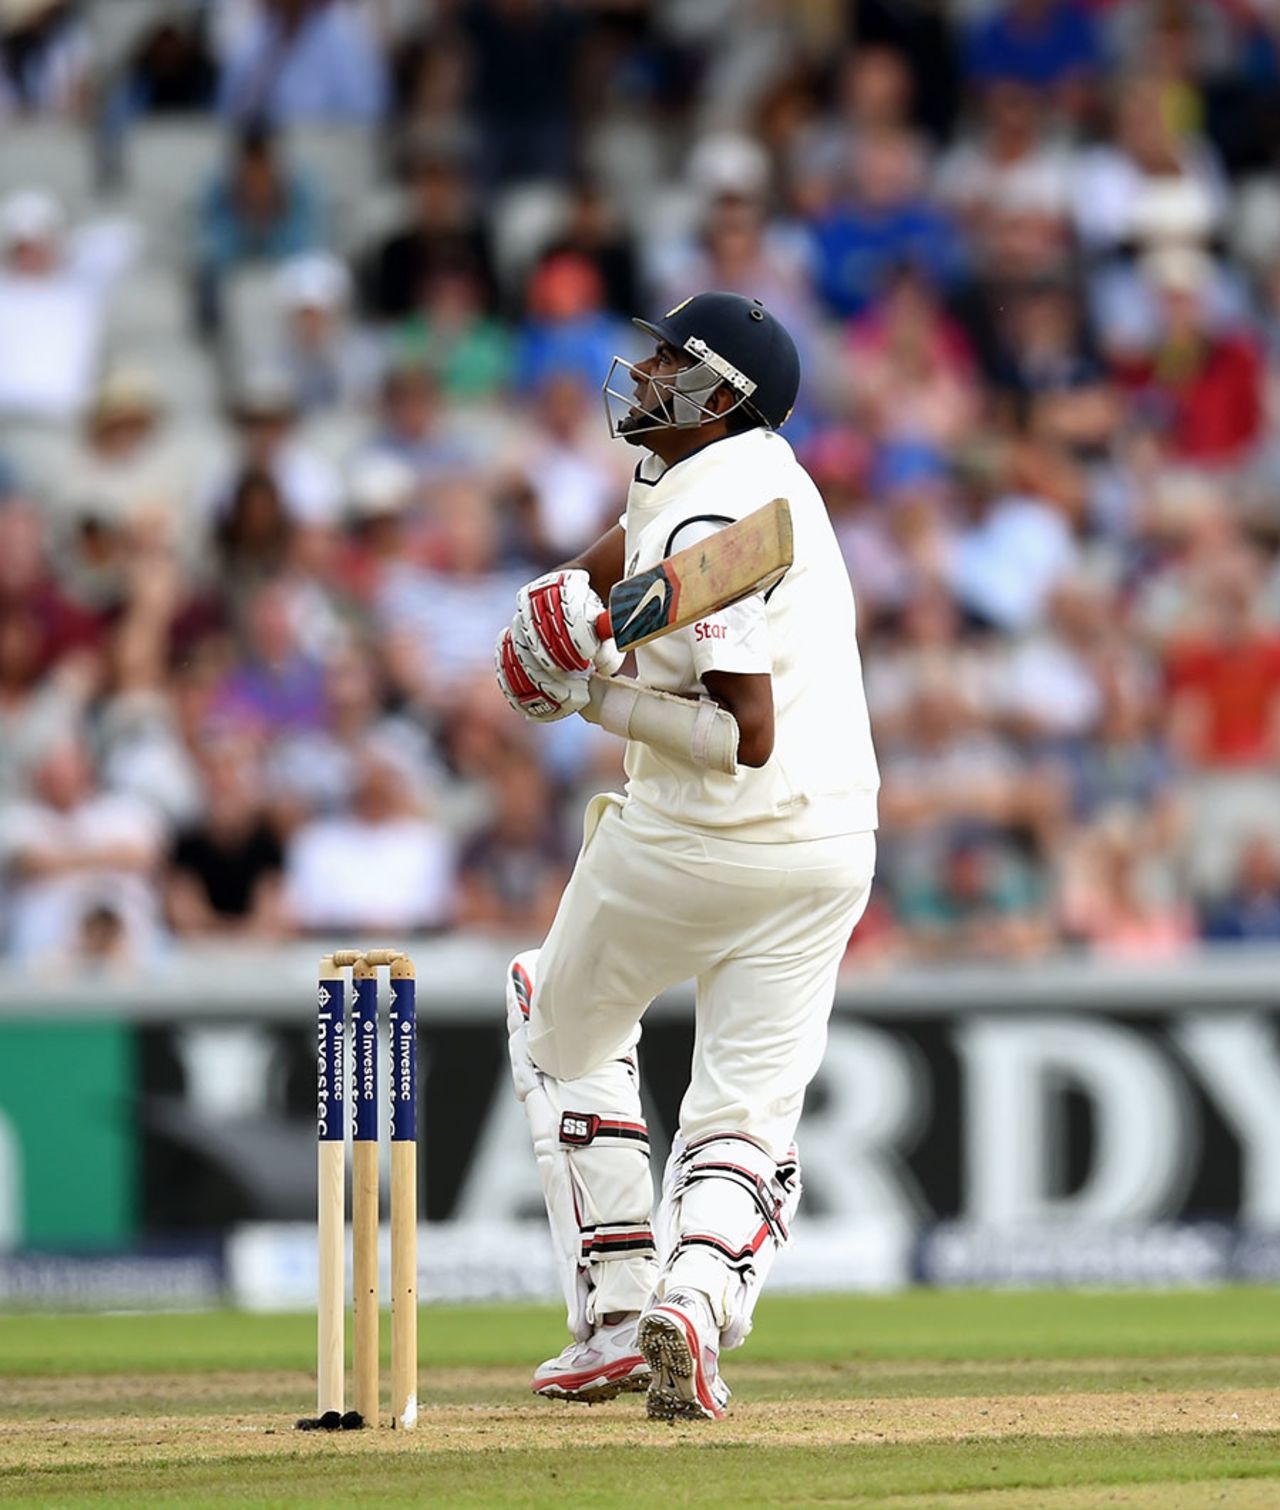 R Ashwin top-edges a hook off James Anderson for six, England v India, 4th Test, Old Trafford, 1st day, August 7, 2014